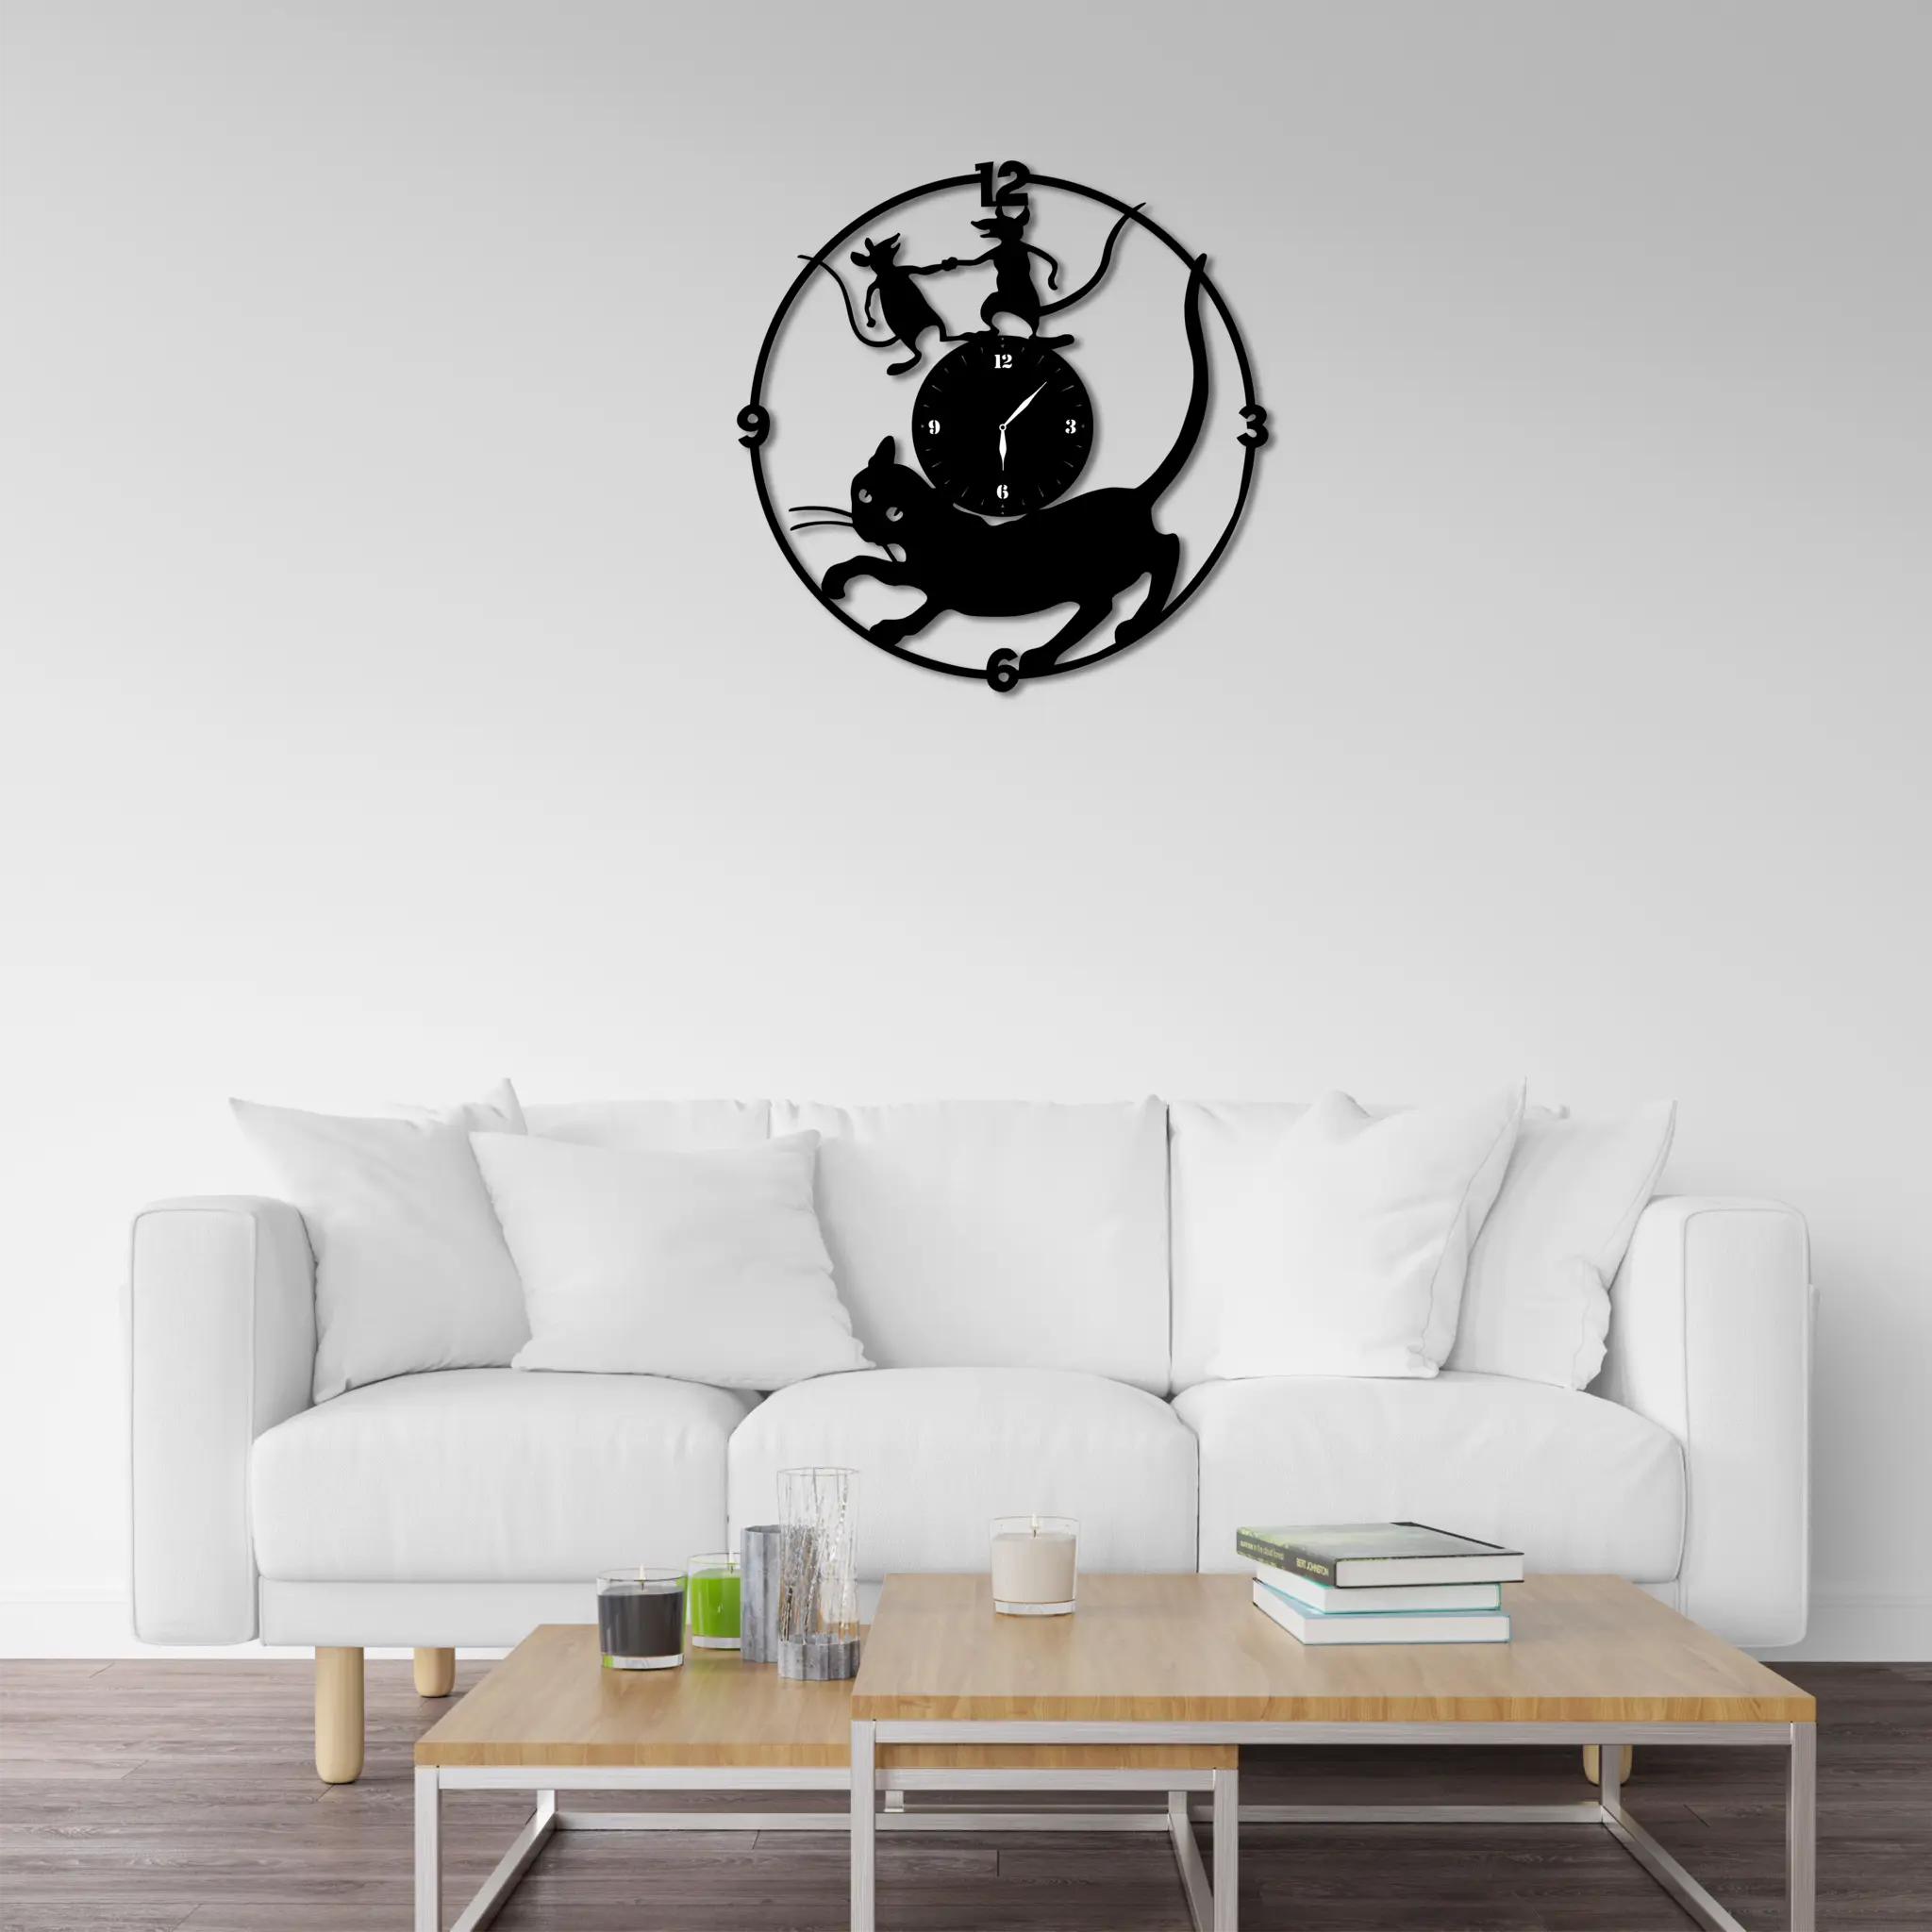 Adorable cats wall art, animal artwork, bedroom décor, kittens Metal record clock, gift for girlfriend's birthday, and nursery décor